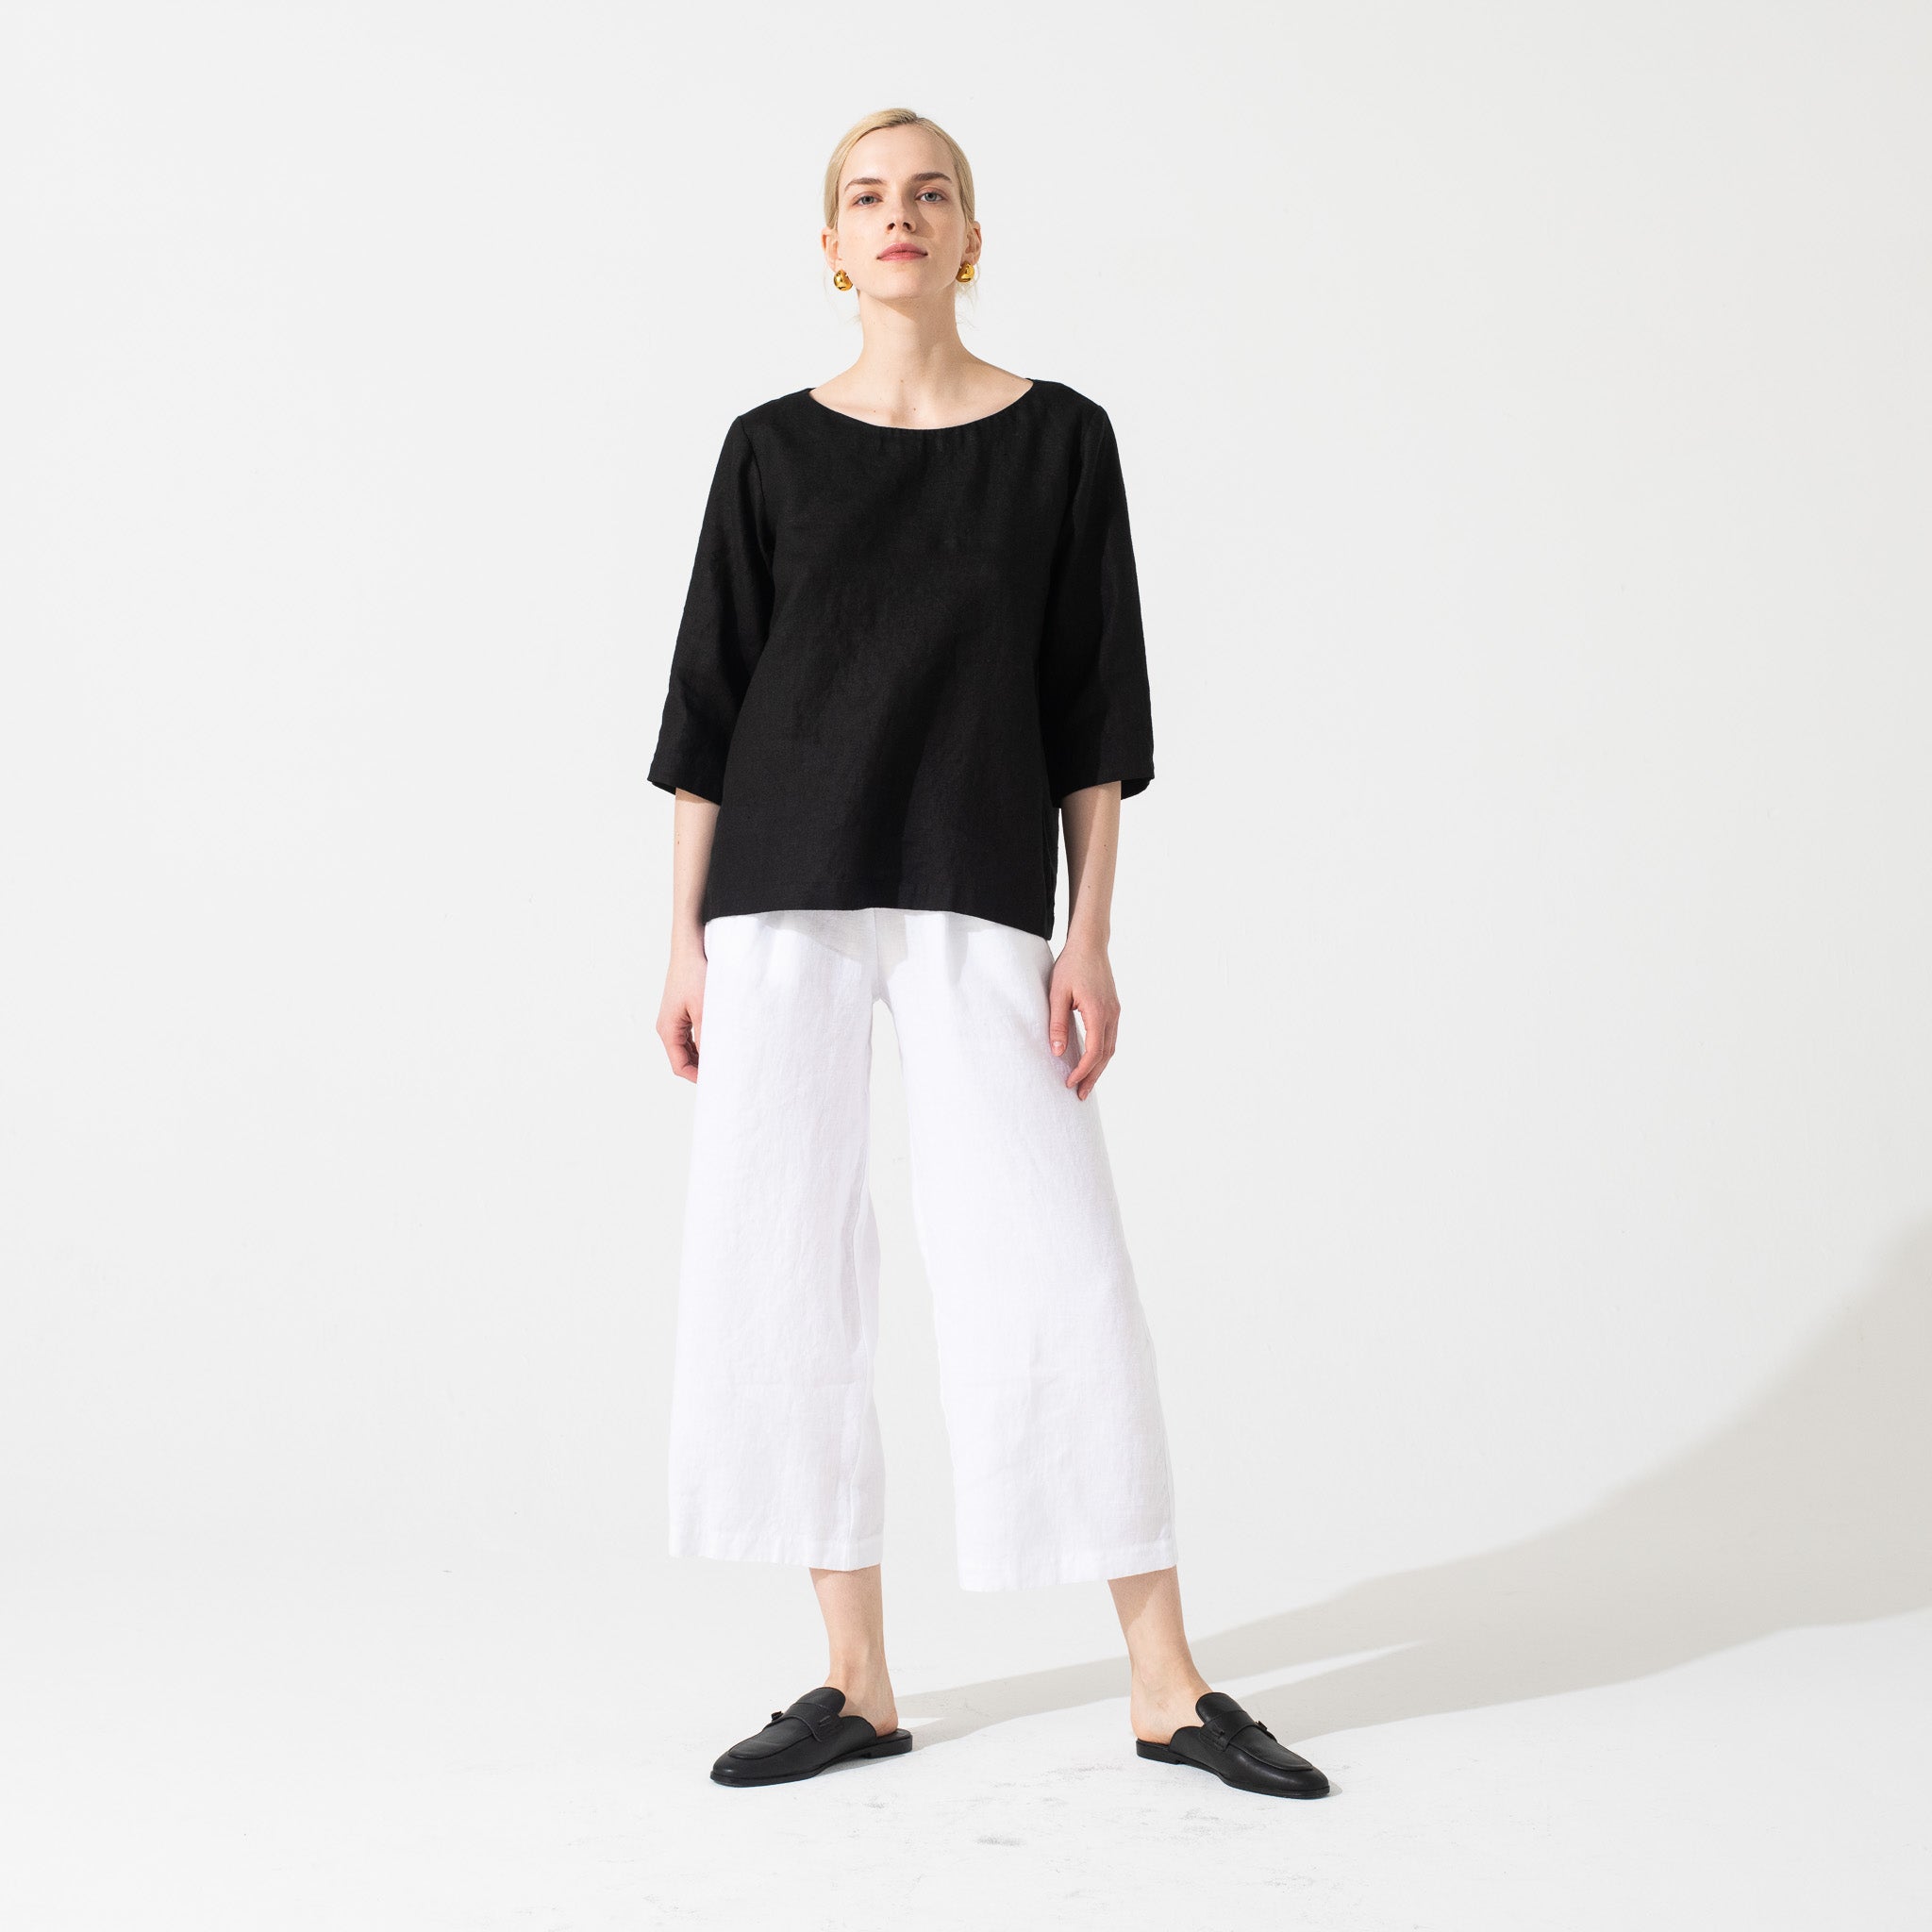 January loose linen top in Black